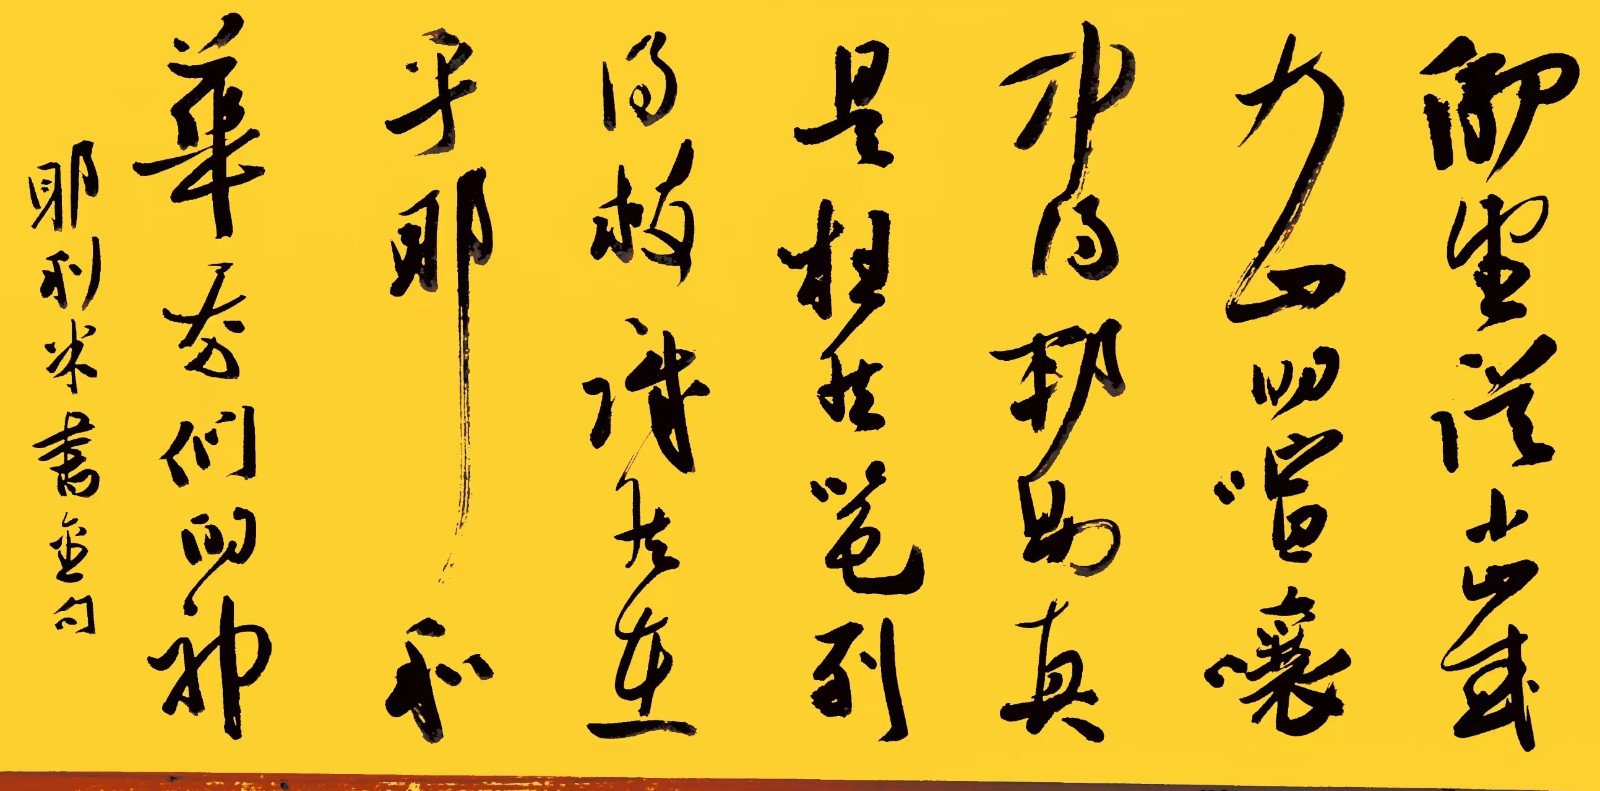 A picture of Bible scripture calligraphy